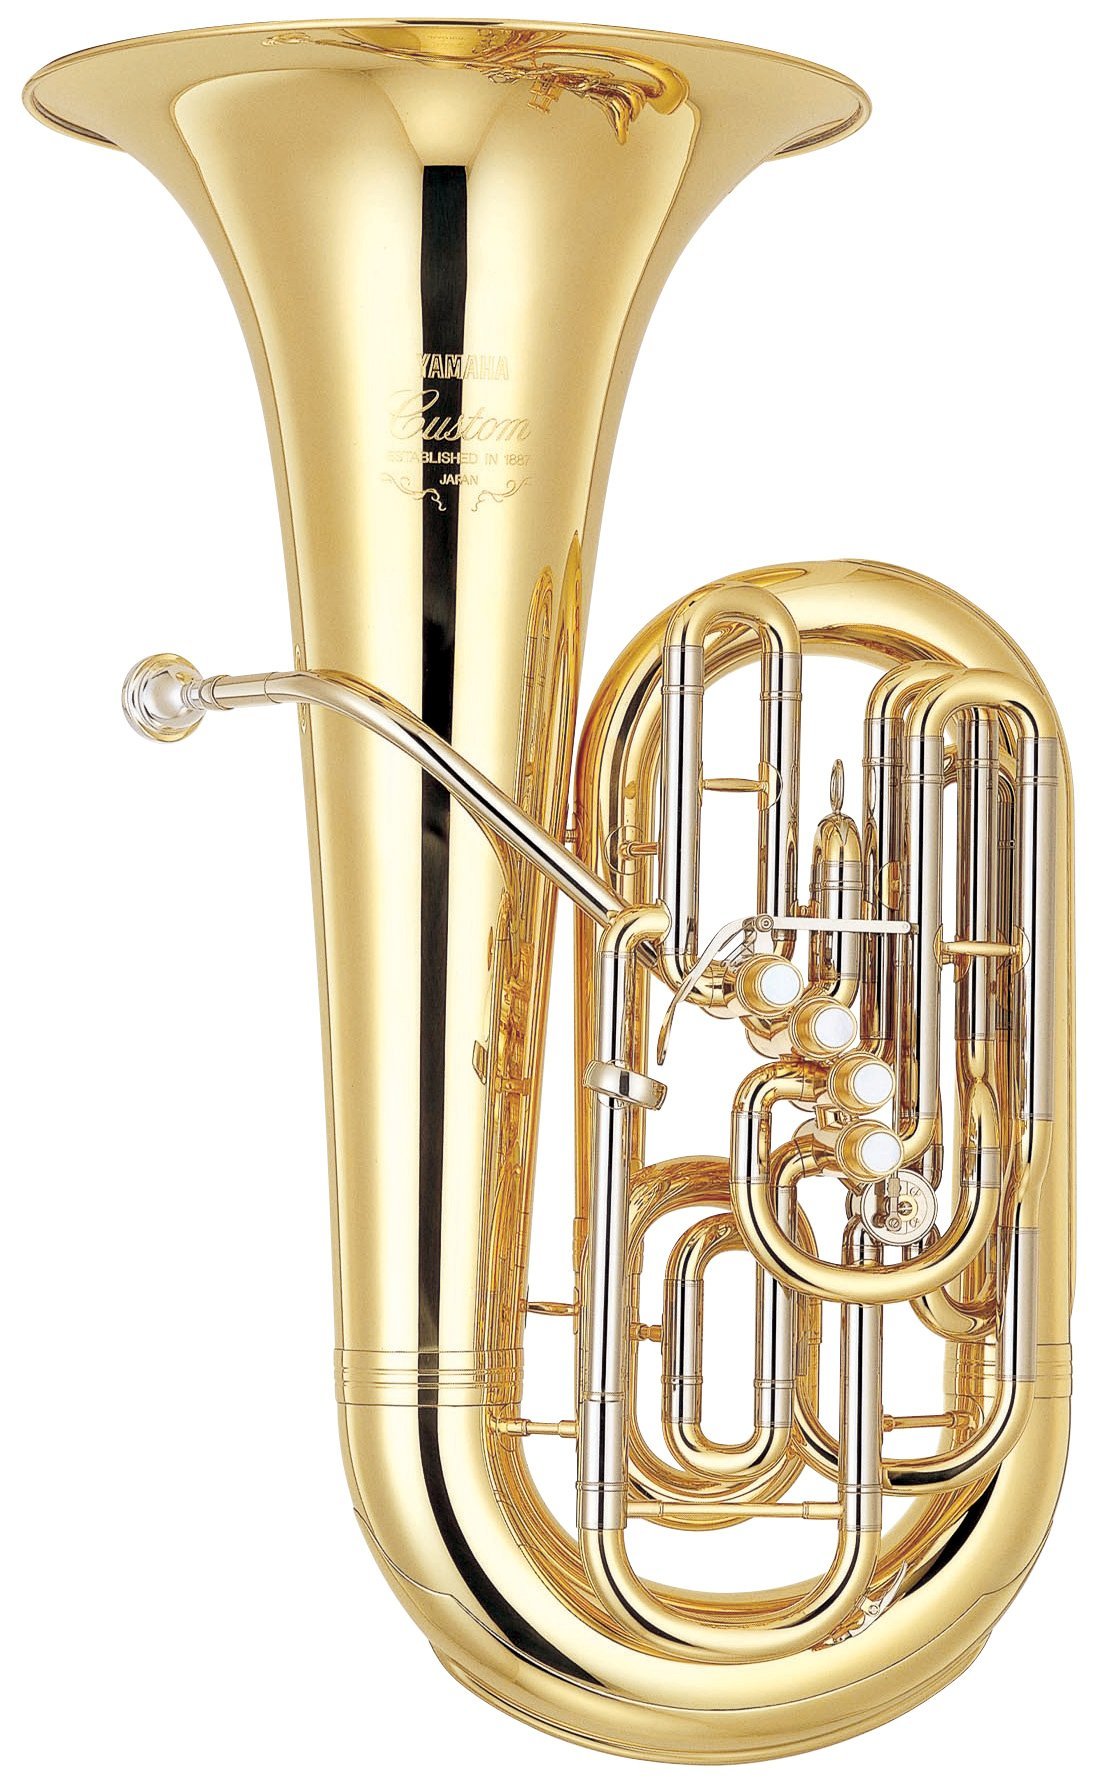 YFB-822 - Overview - Tubas - Brass & Woodwinds - Musical 